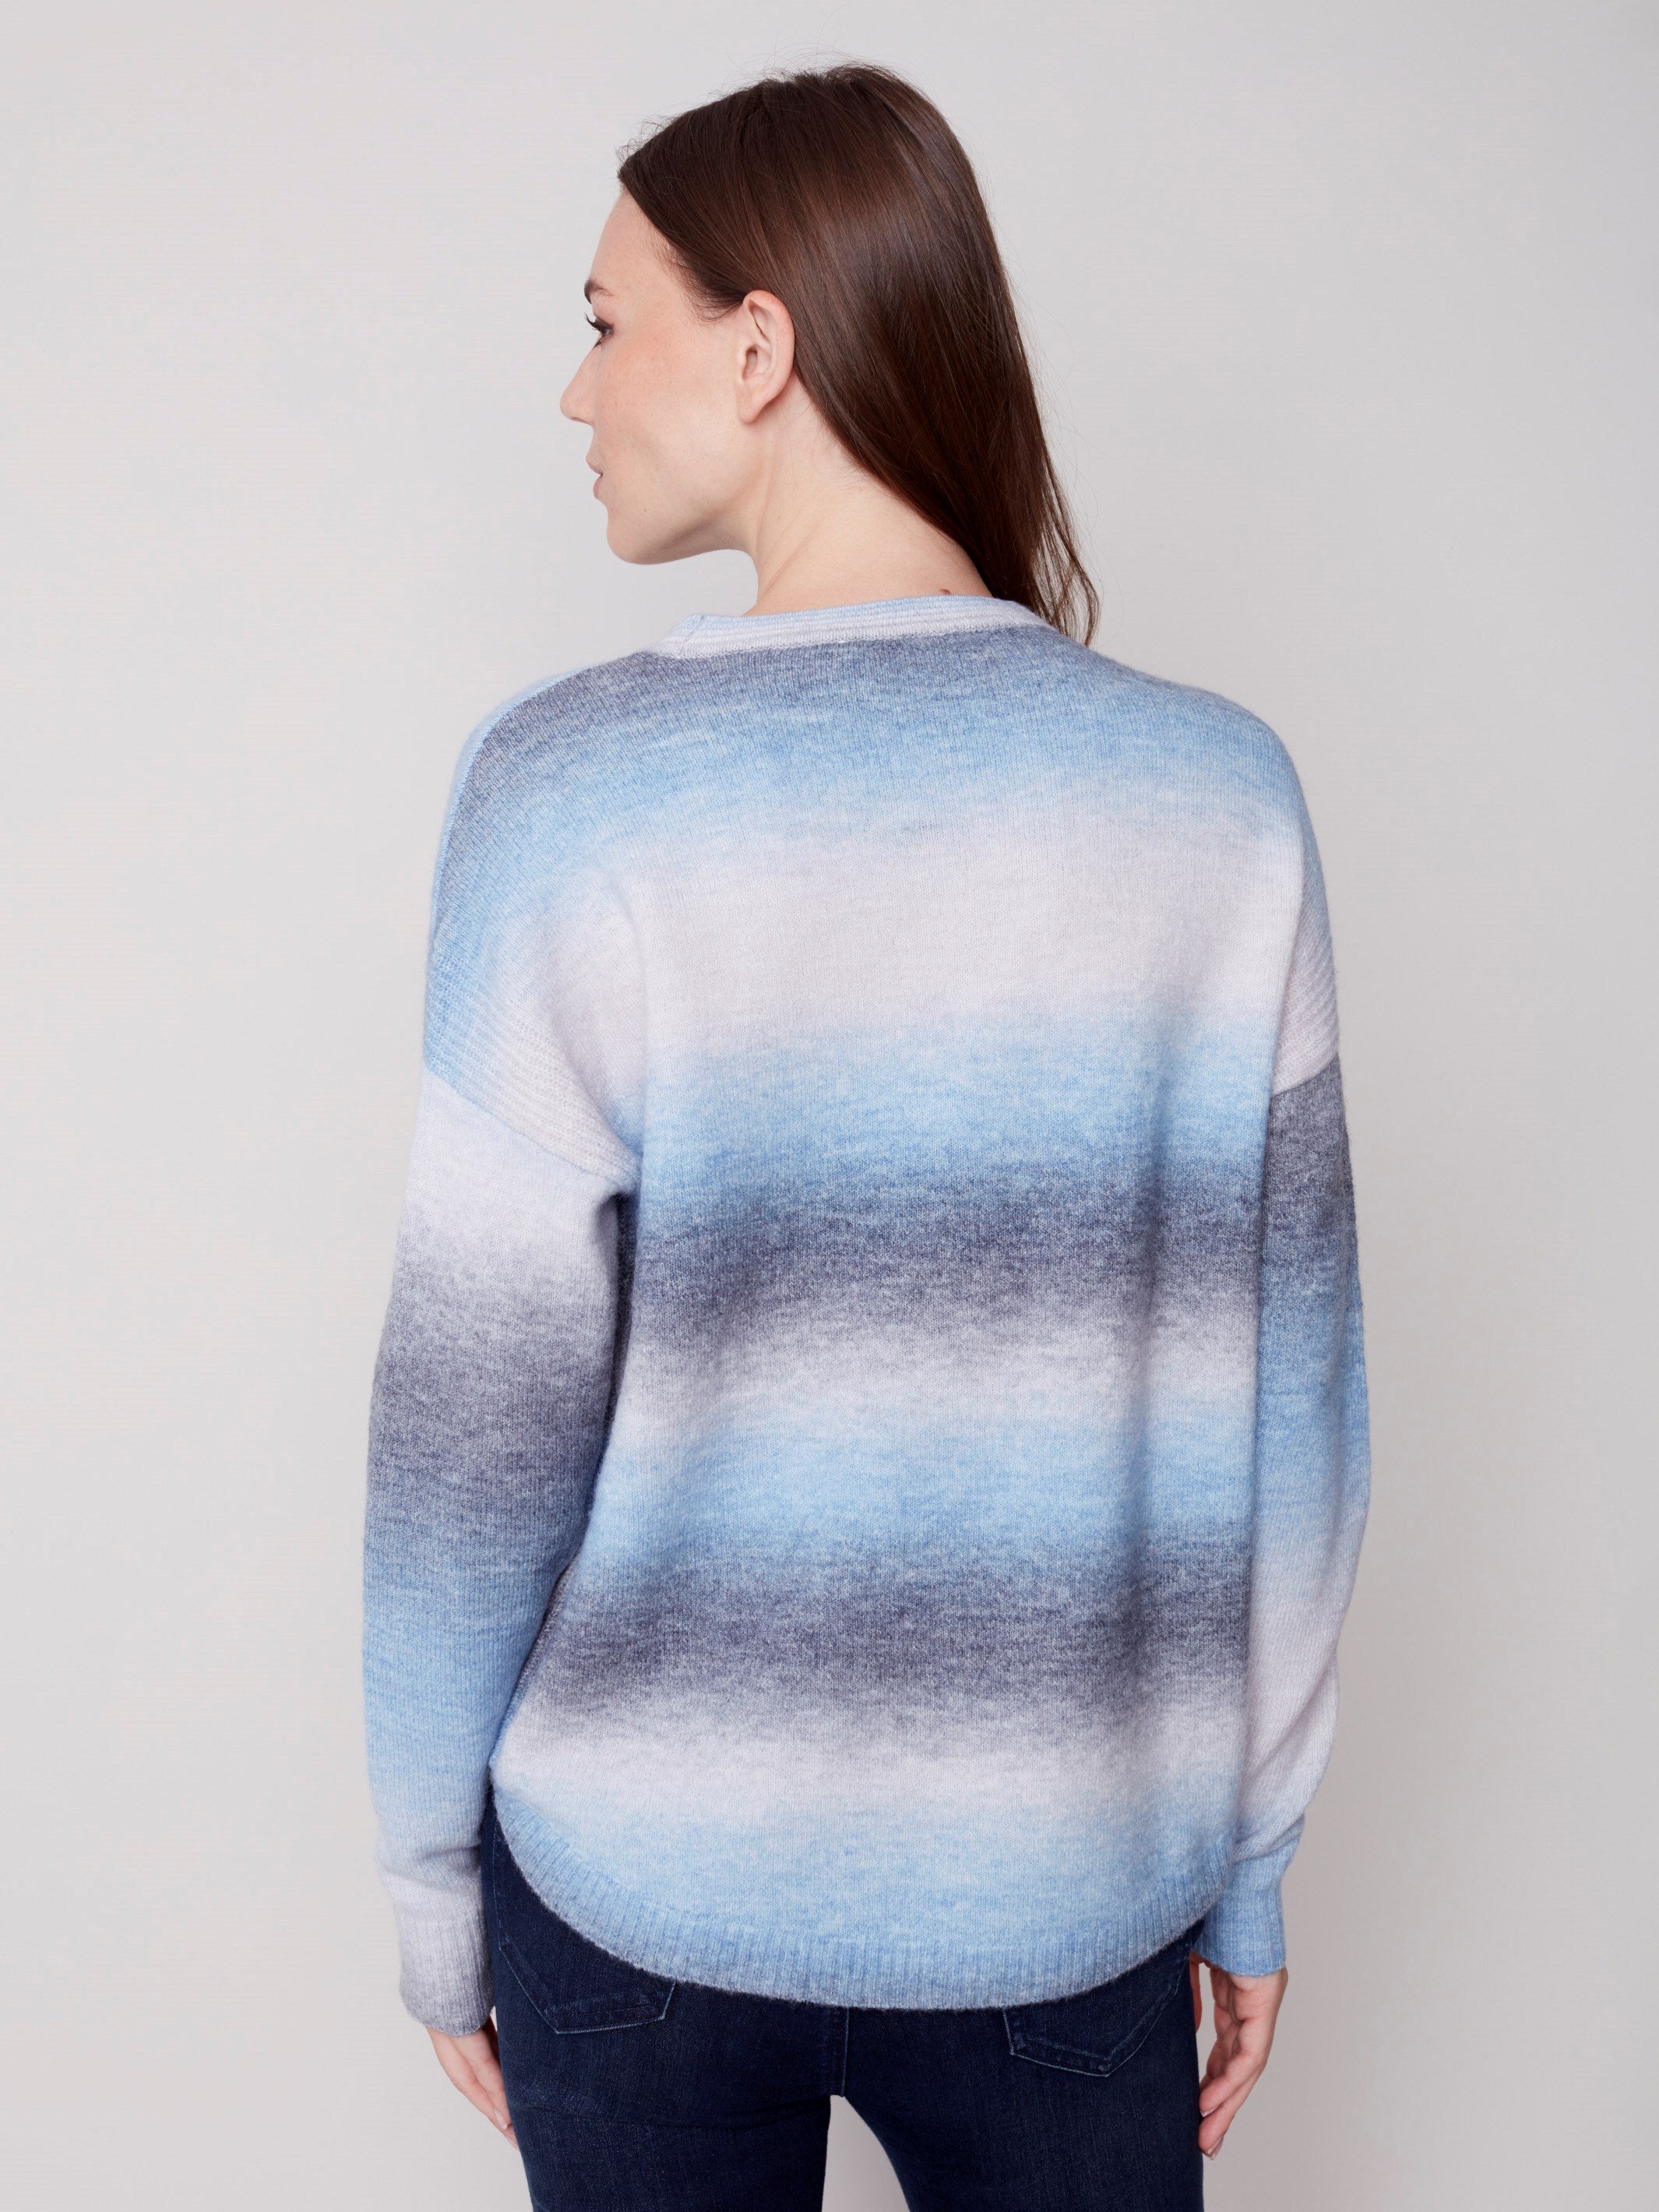 Ombré Sweater with Removable Scarf - Denim